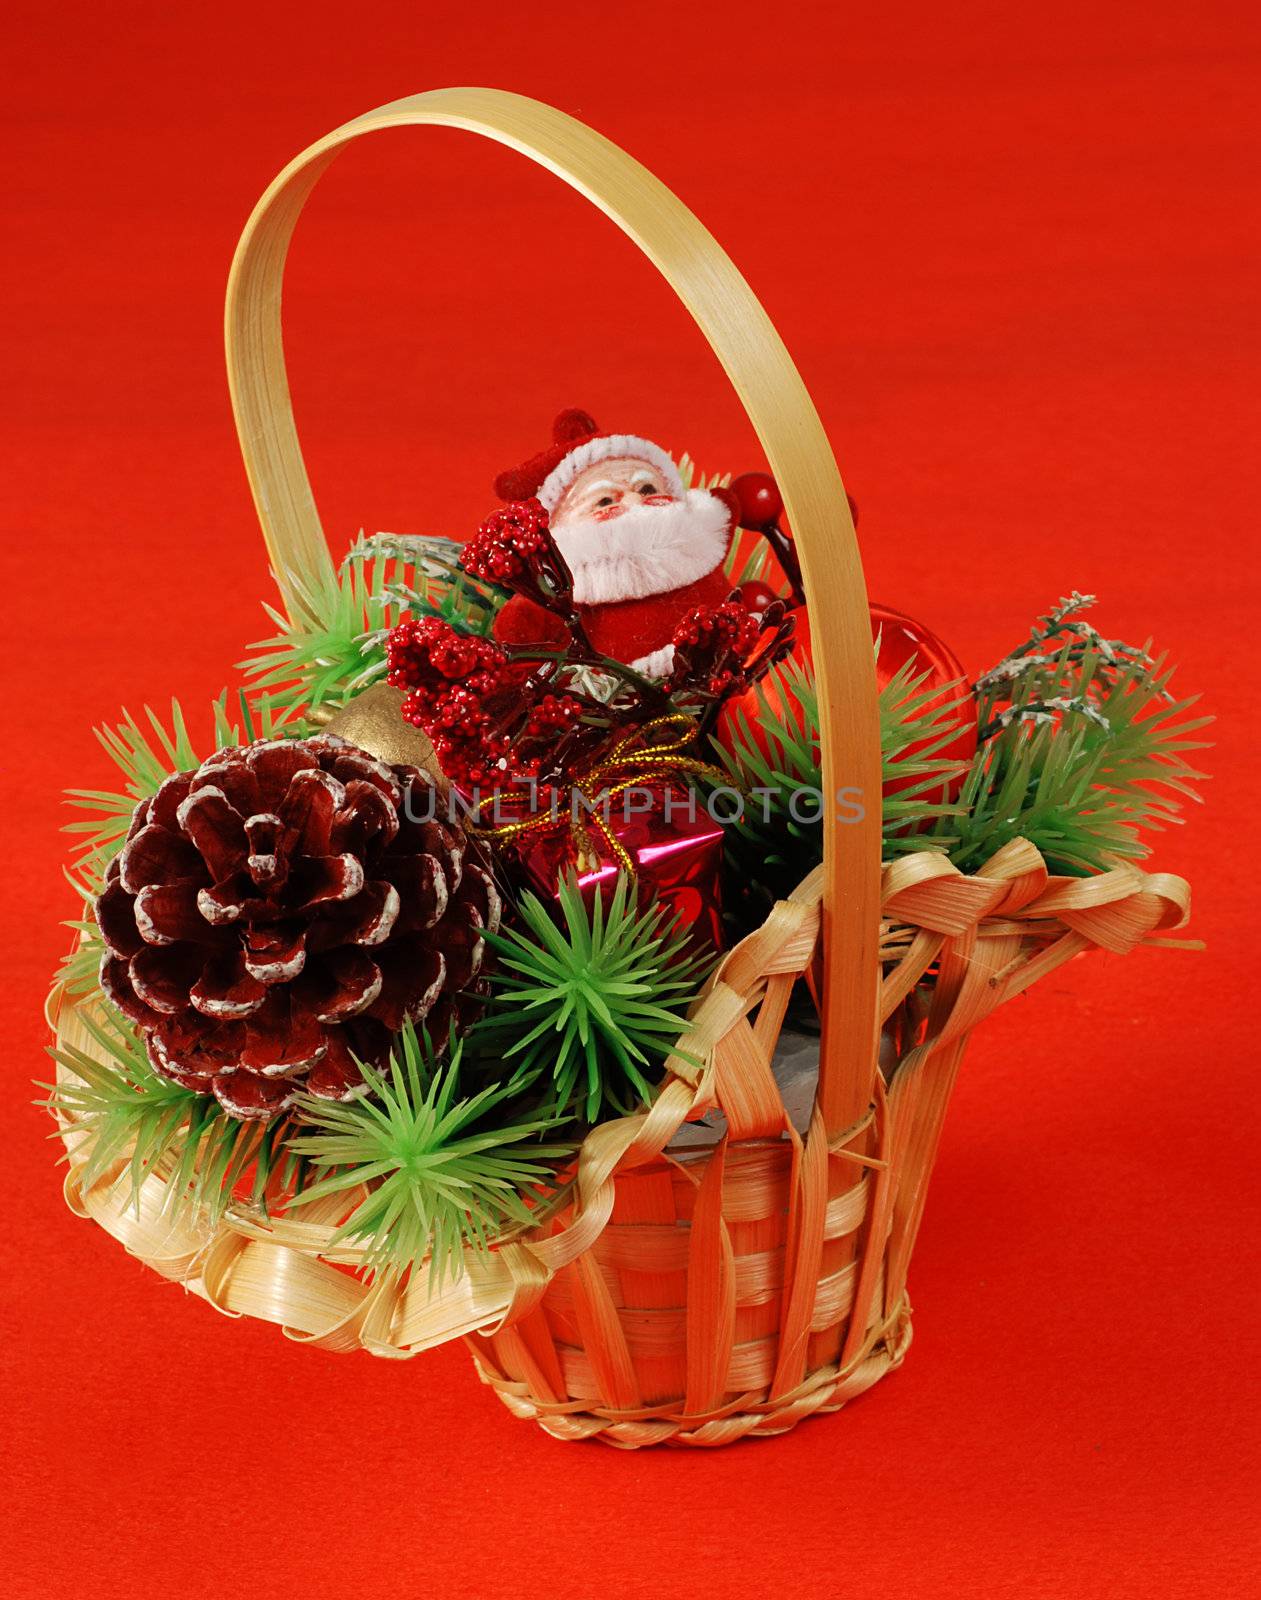 Christmas basket by fyletto